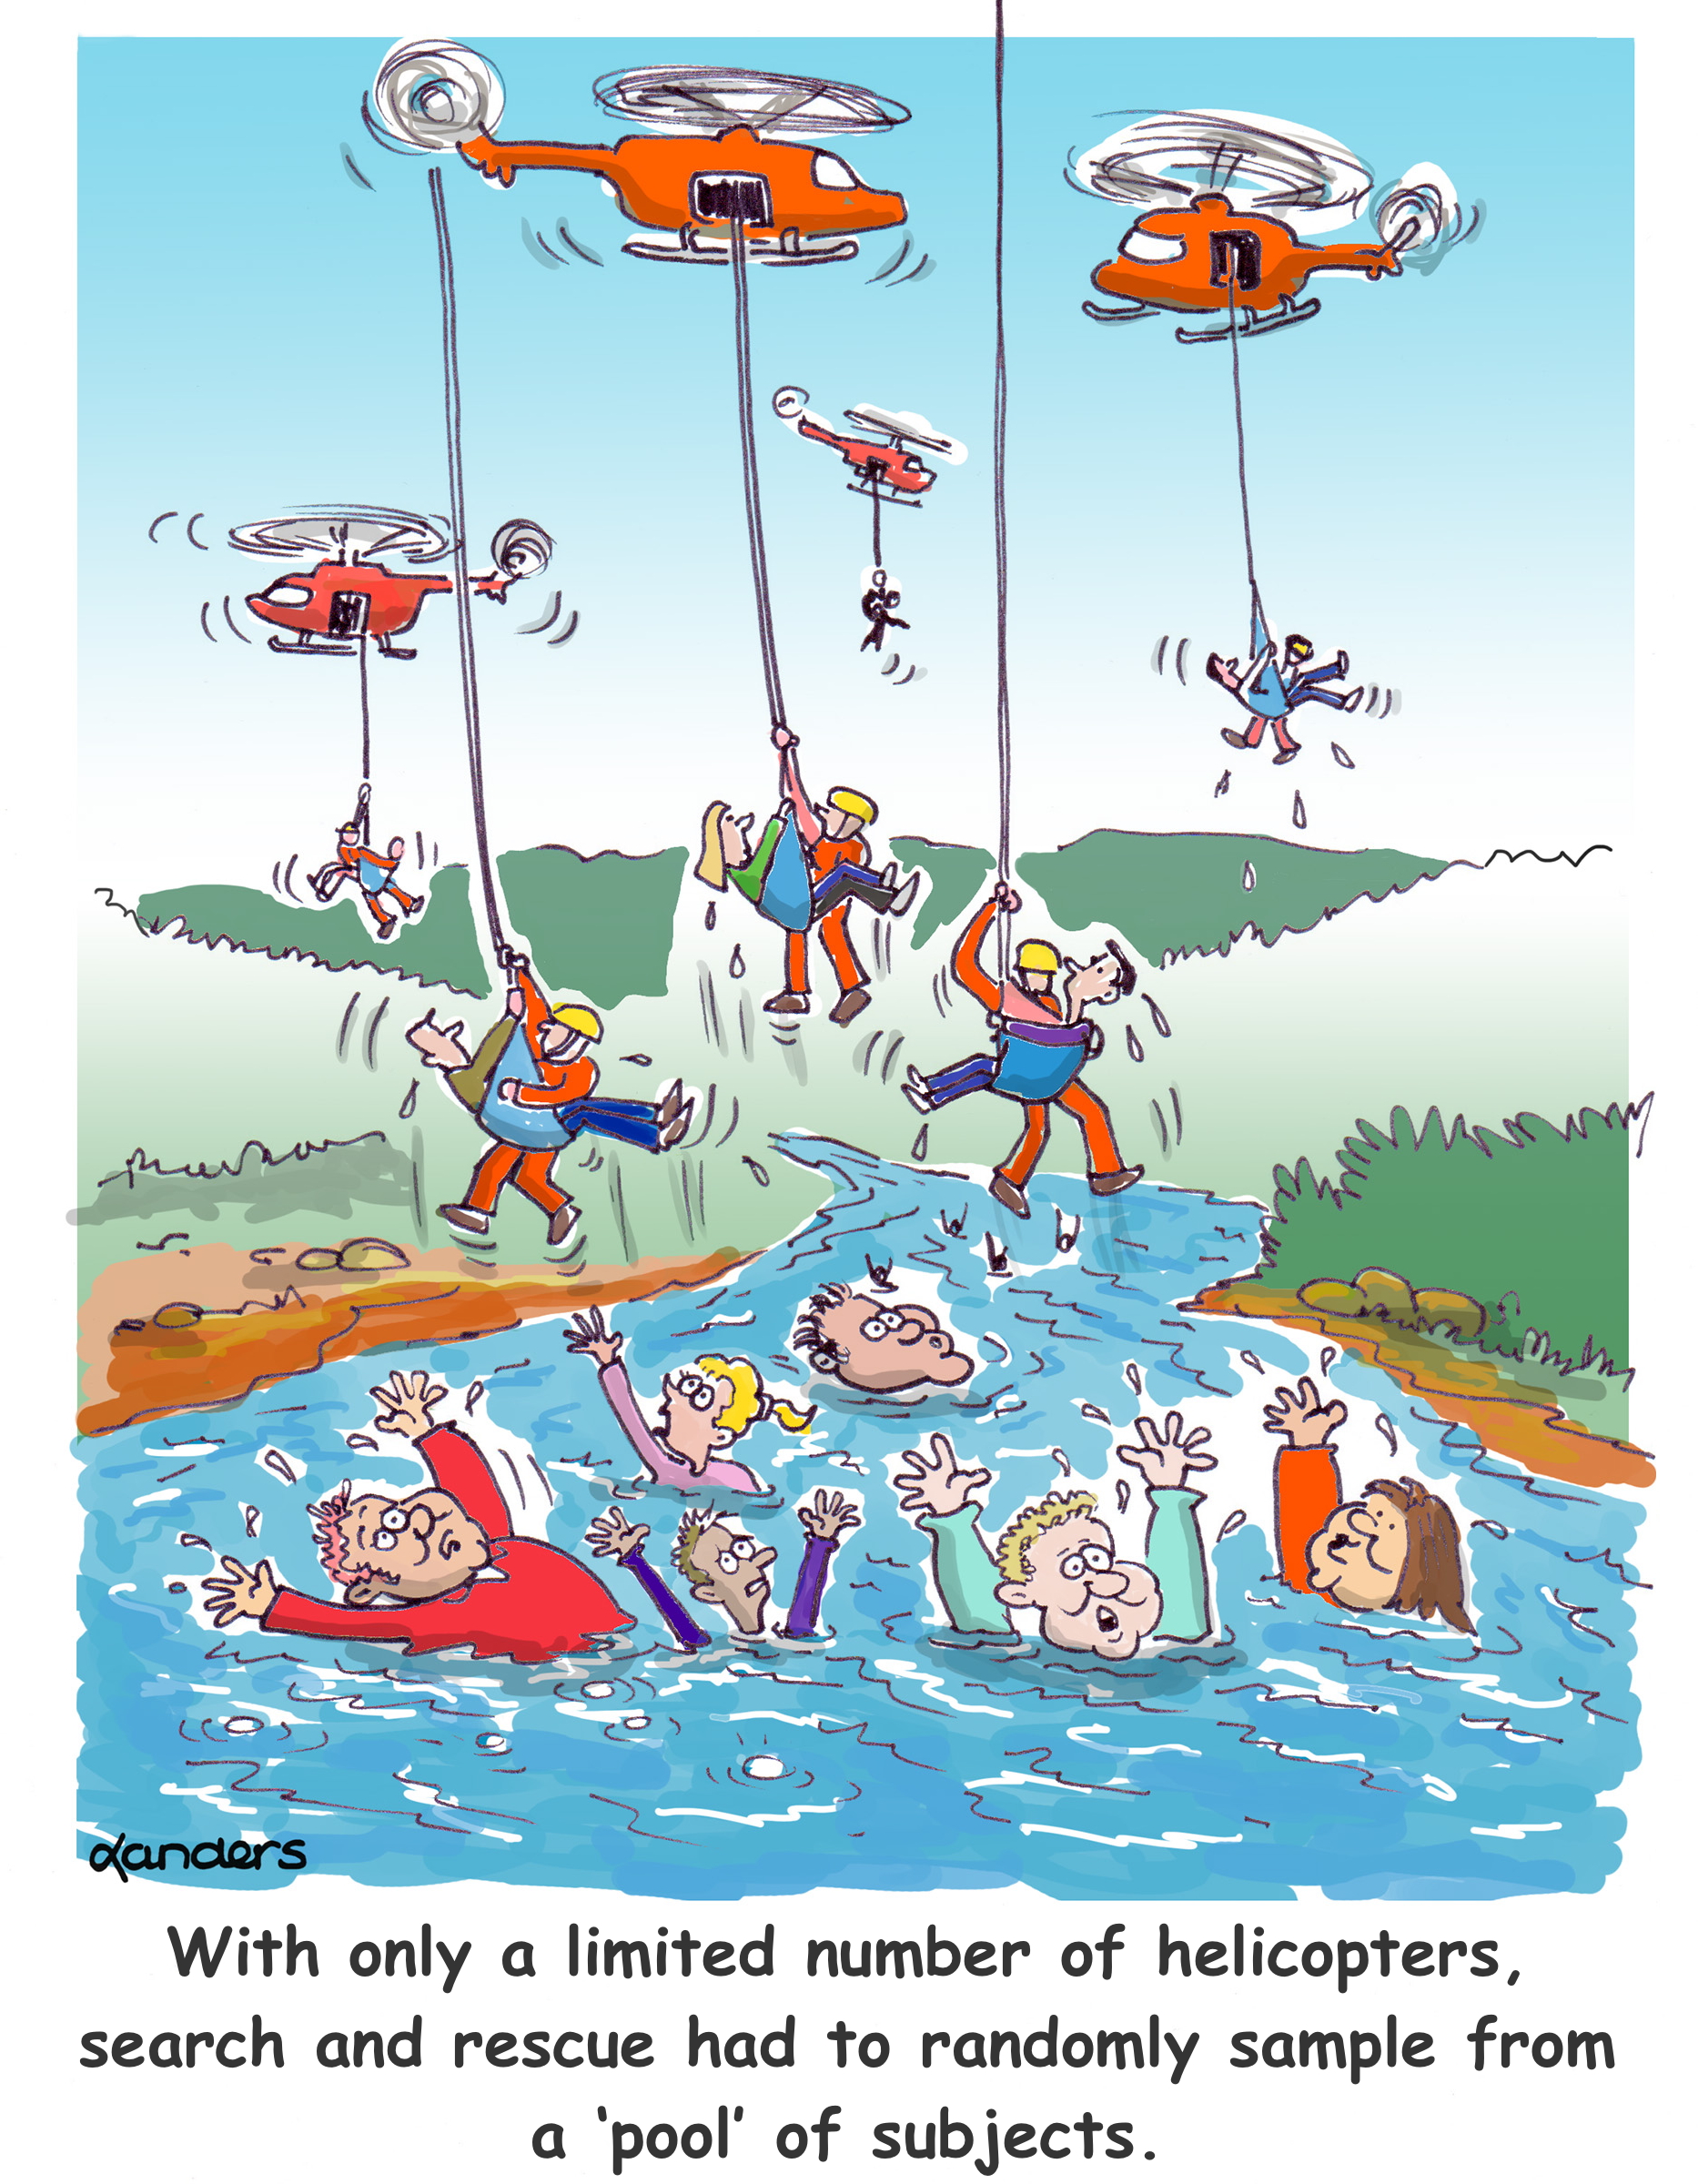 cartoon showing helicopter rescue of drowning people with caption